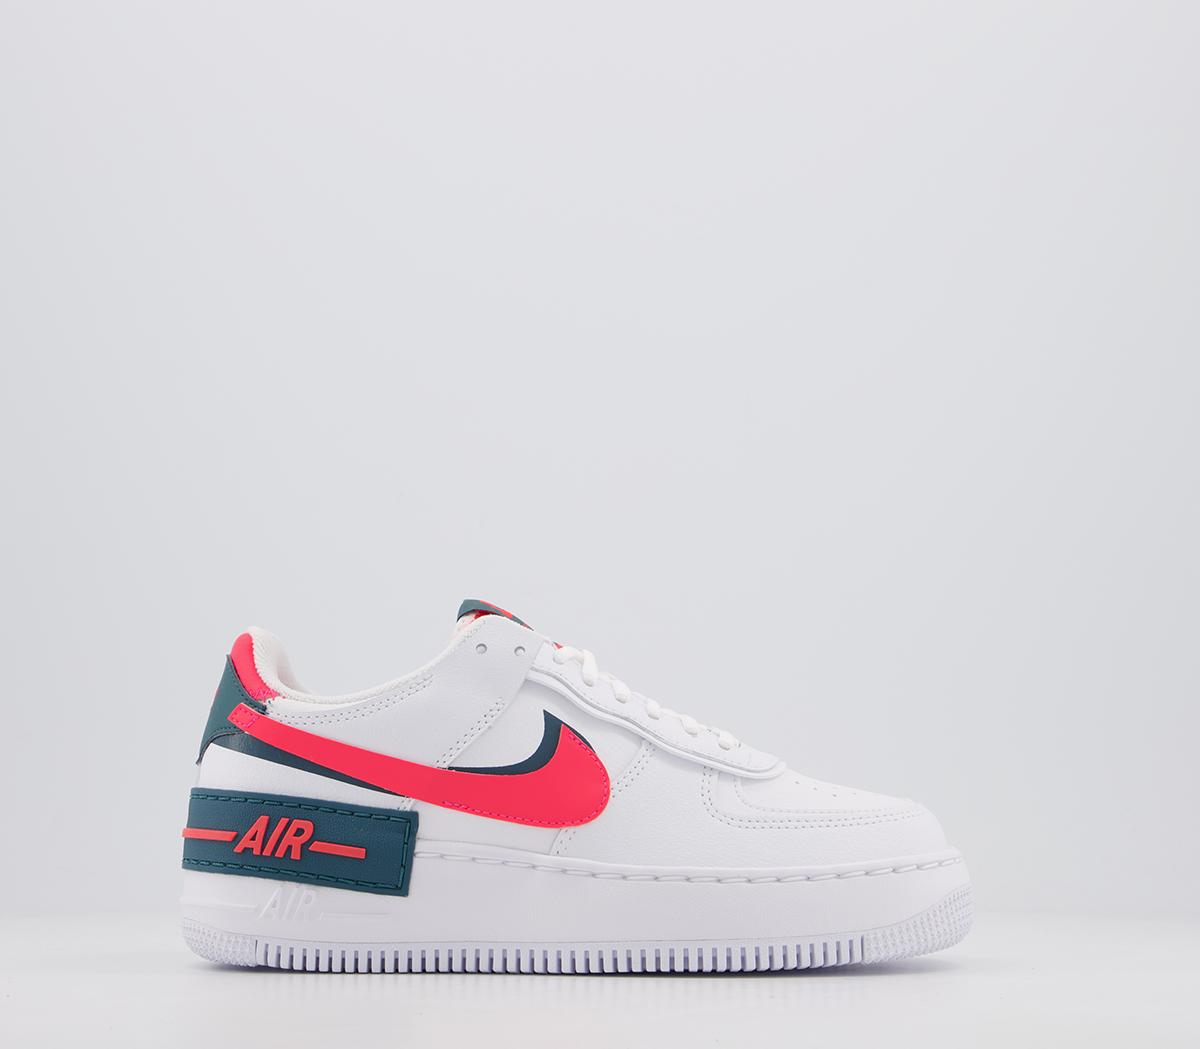 NikeAir Force 1 Shadow TrainersWhite Dark Teal Solar Red White